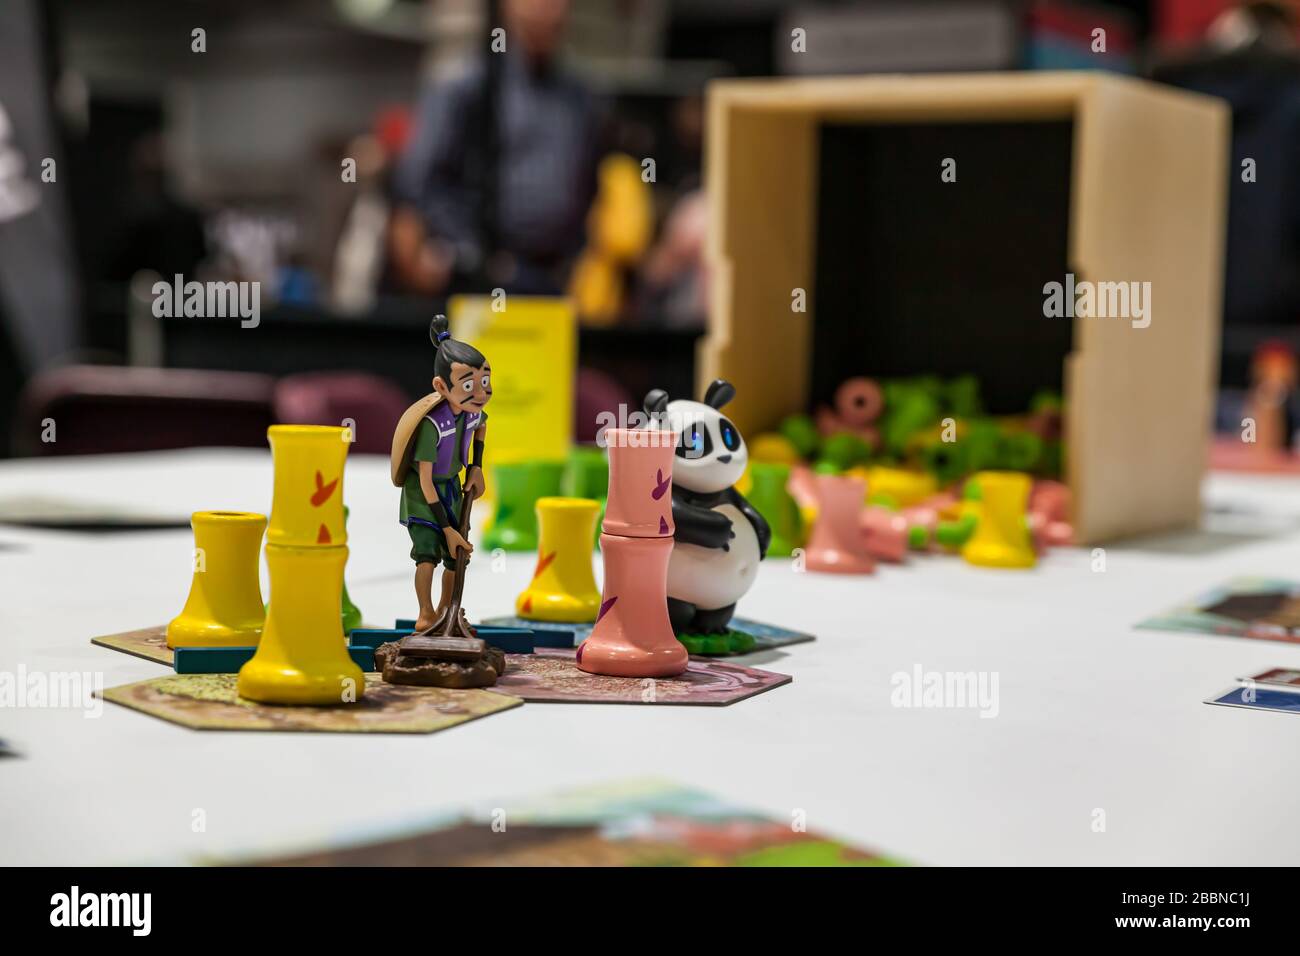 Toy collectors fair hi-res stock photography and images - Alamy